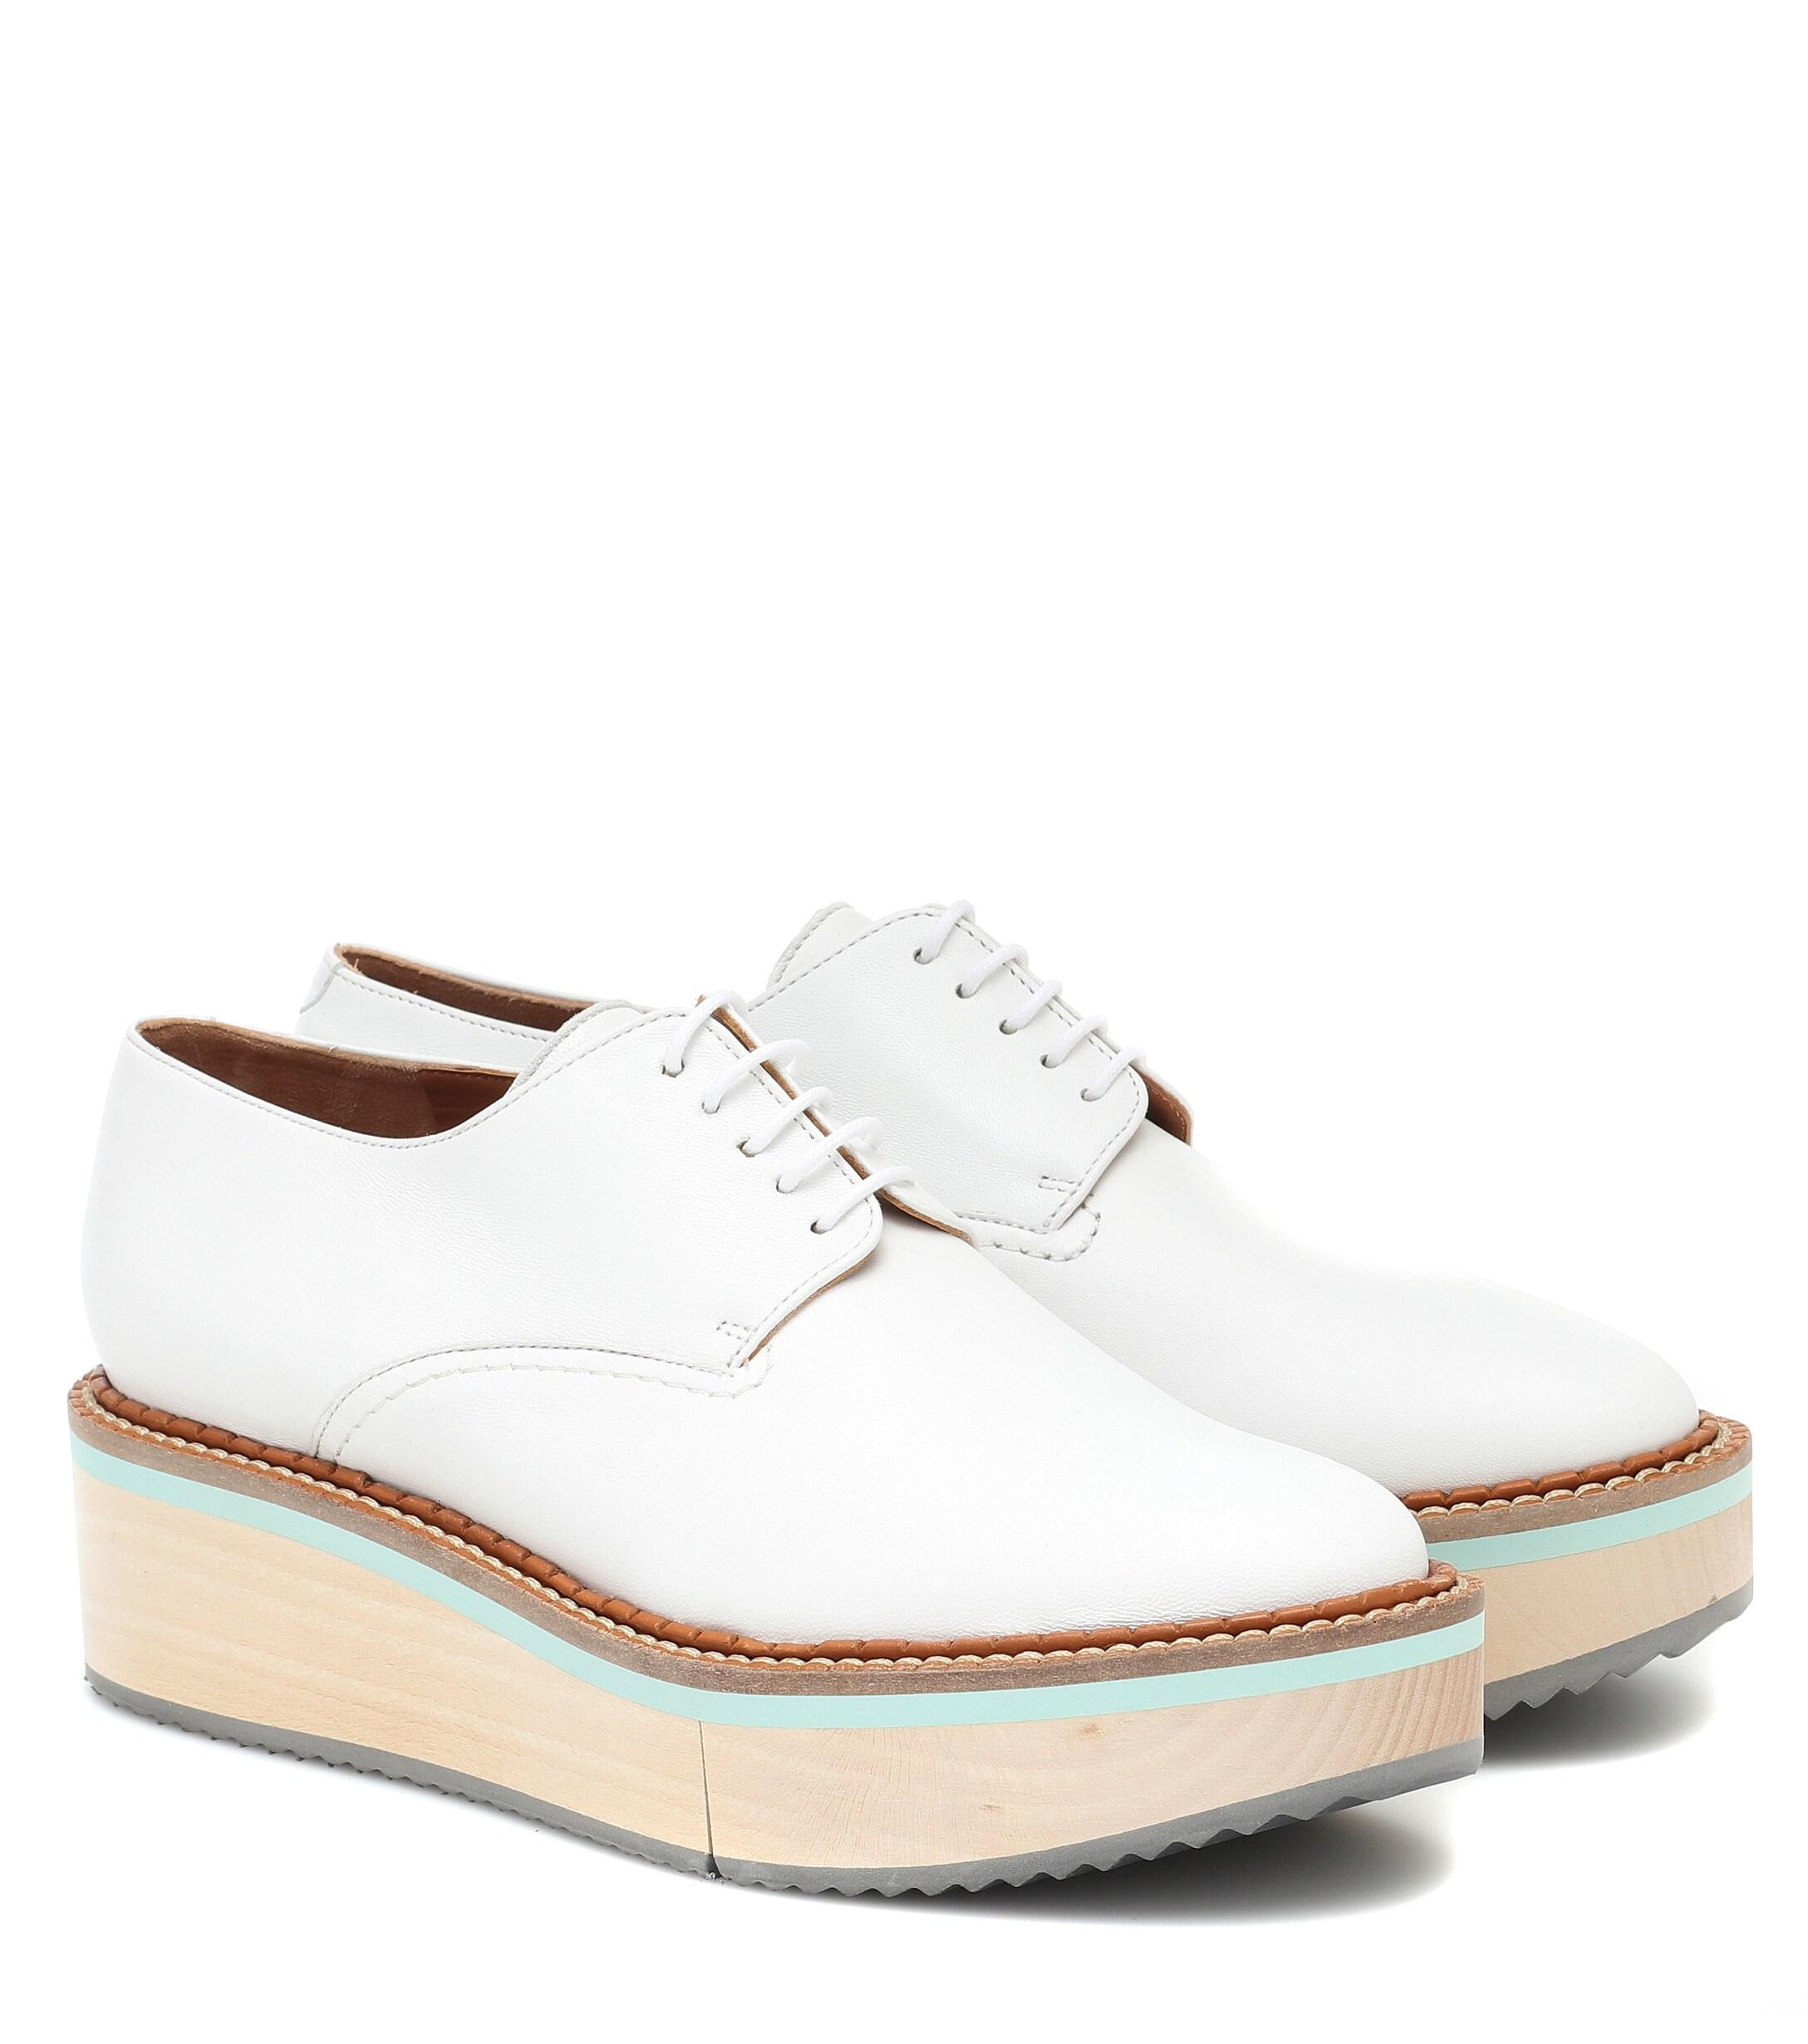 Robert Clergerie Brook Leather Shoes in White | Lyst